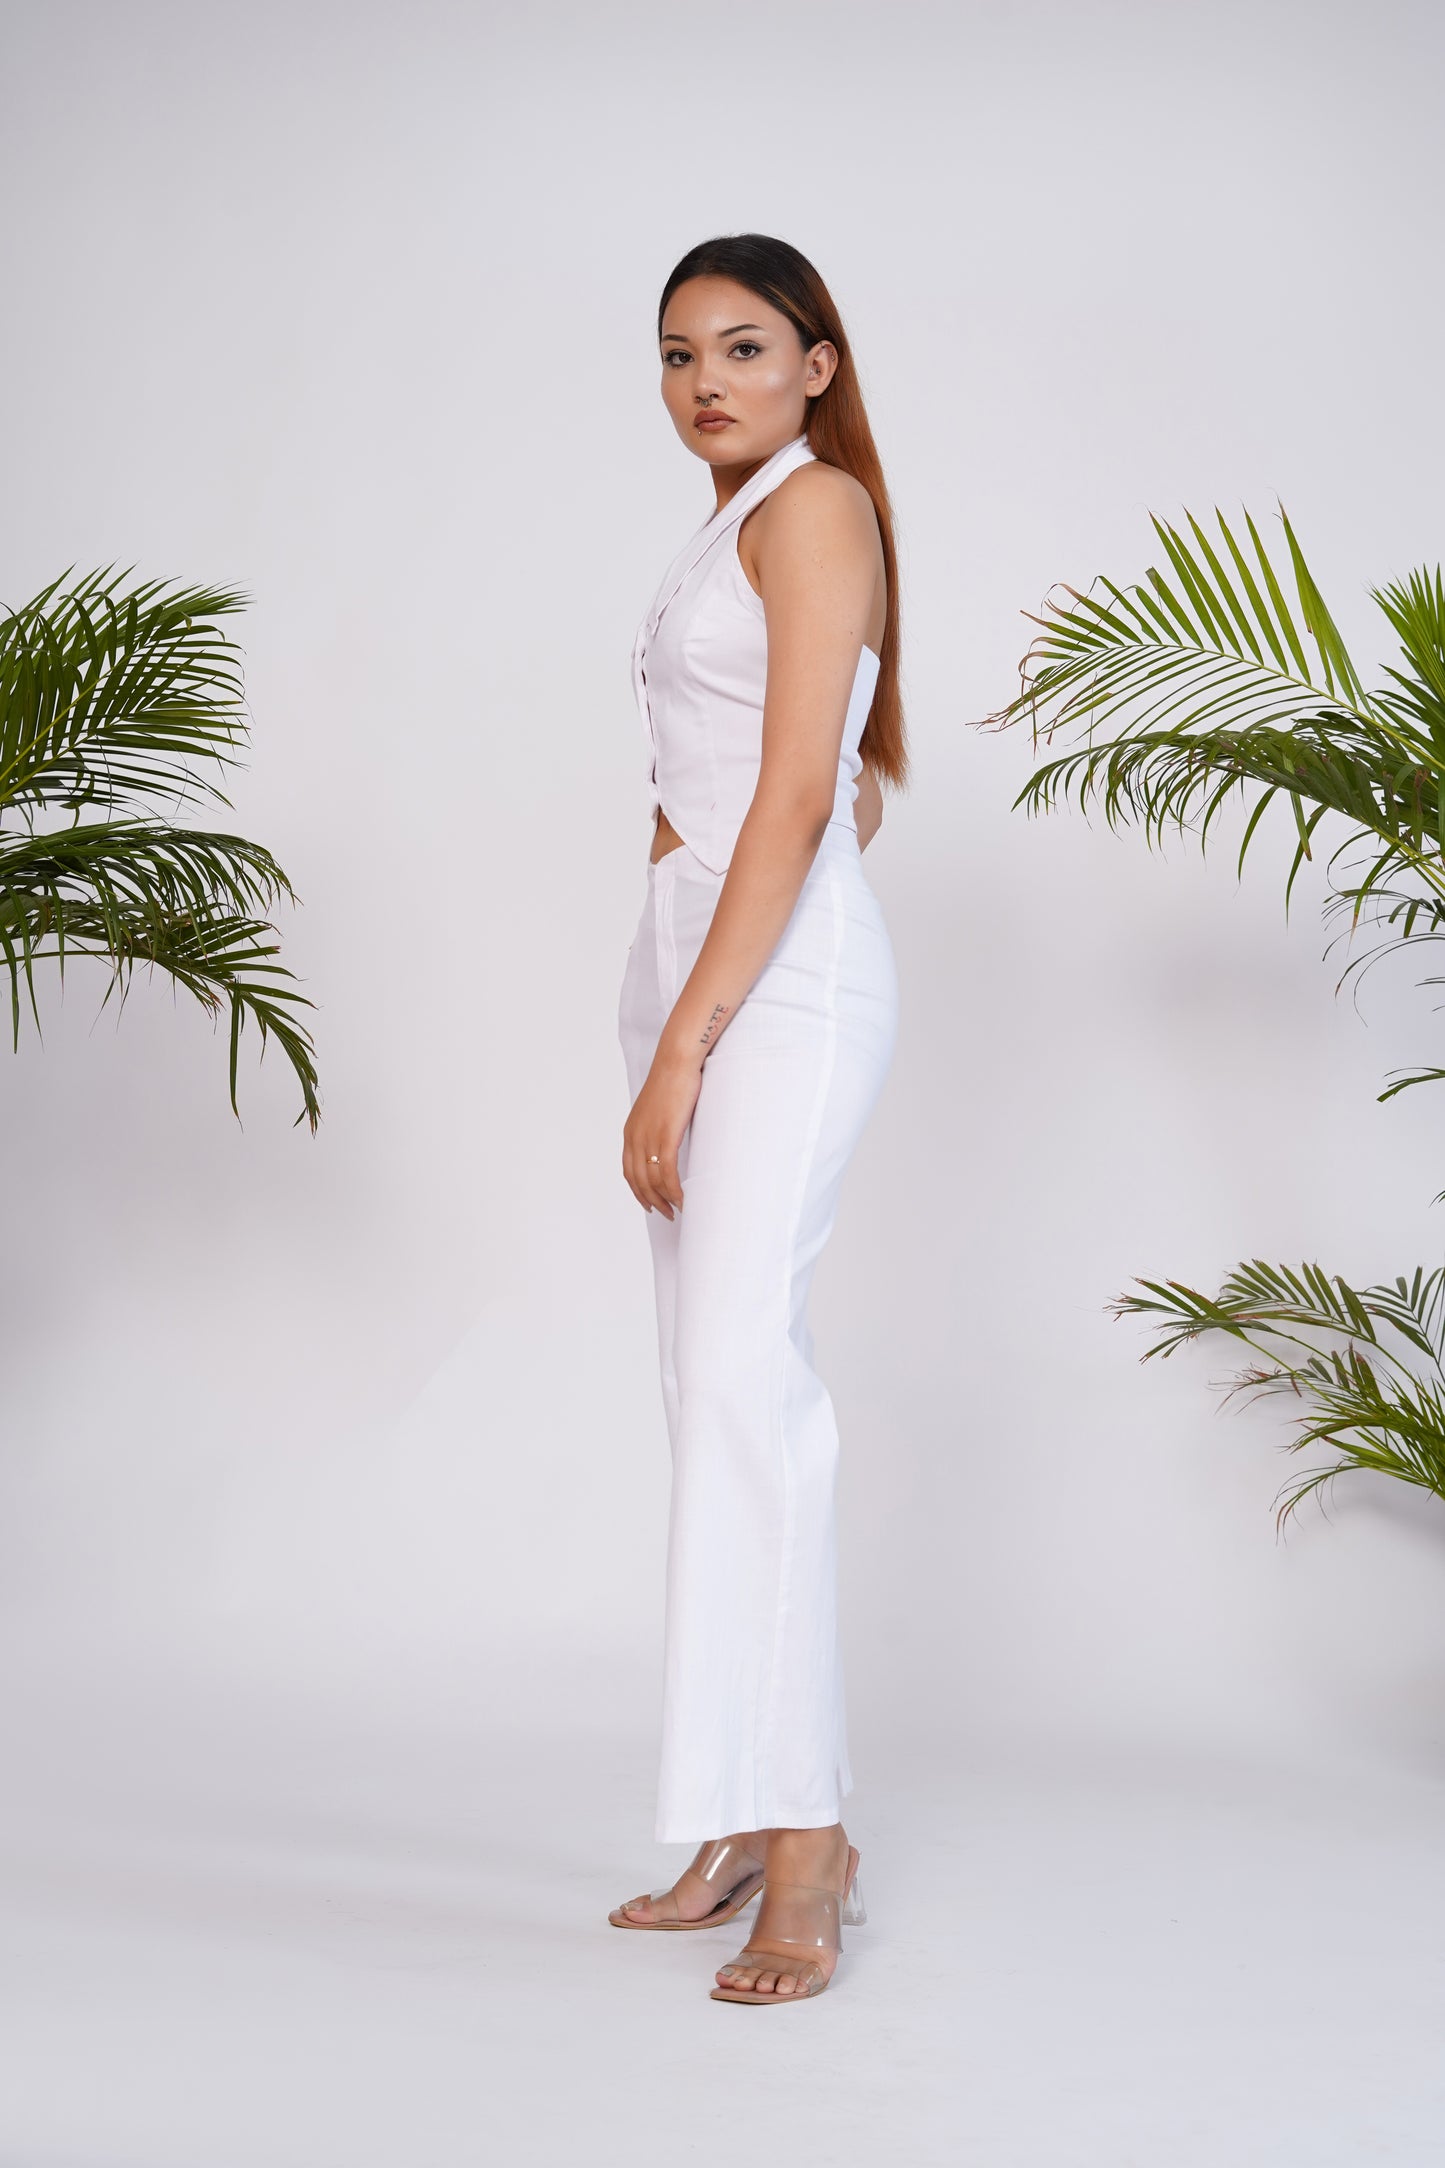 White collared waistcoat and pant set